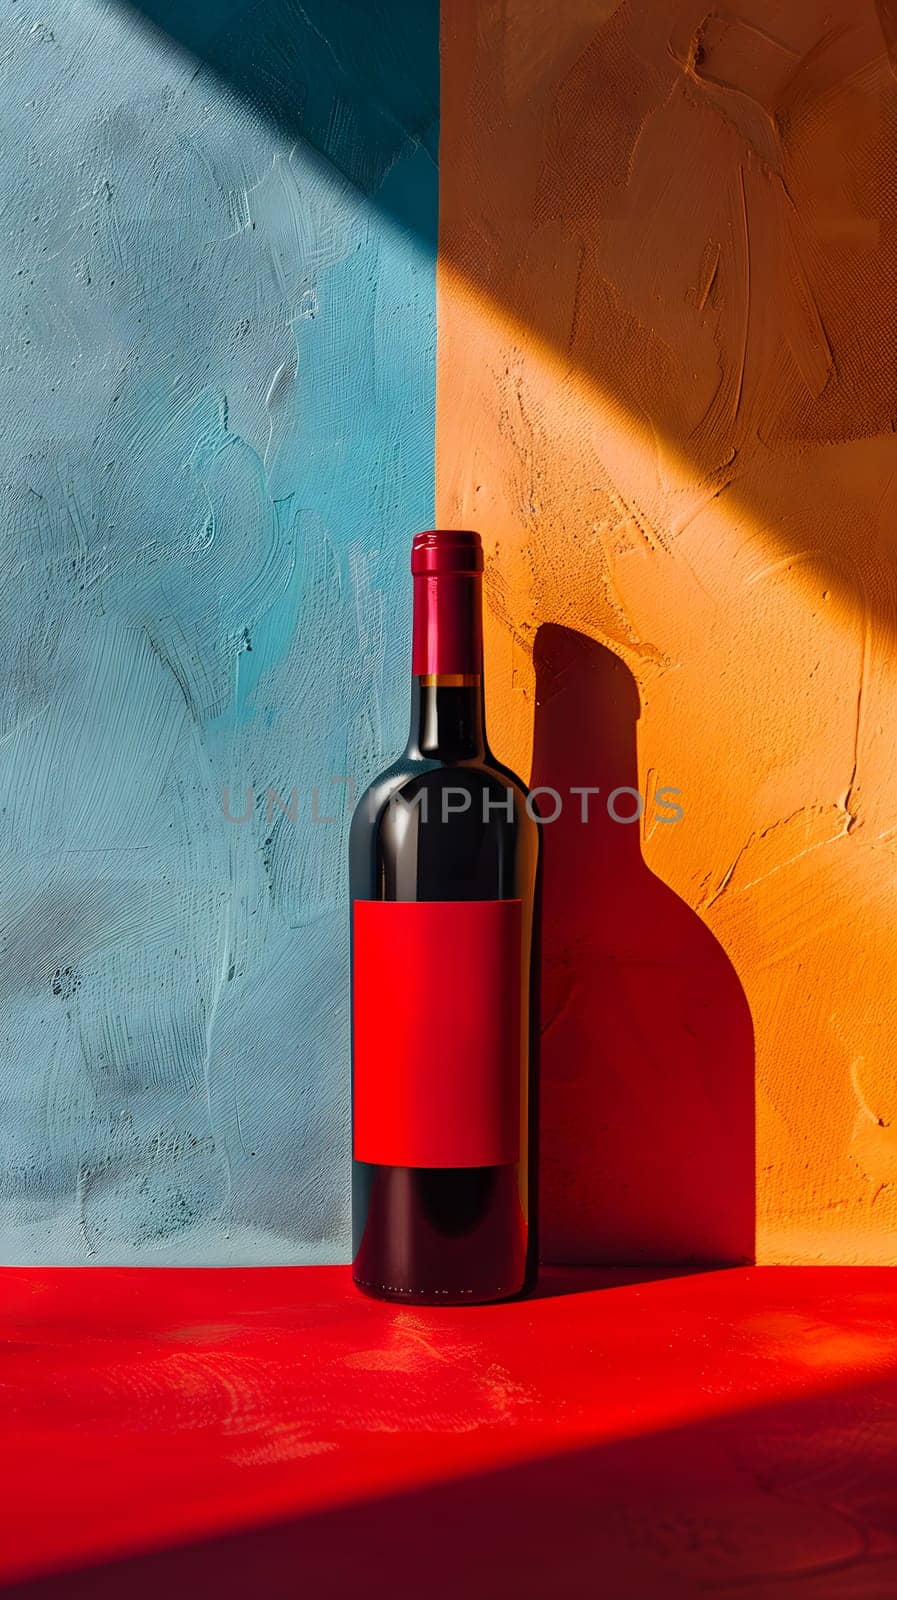 A red wine bottle rests on a crimson table, sealed with a cork stopper by Nadtochiy